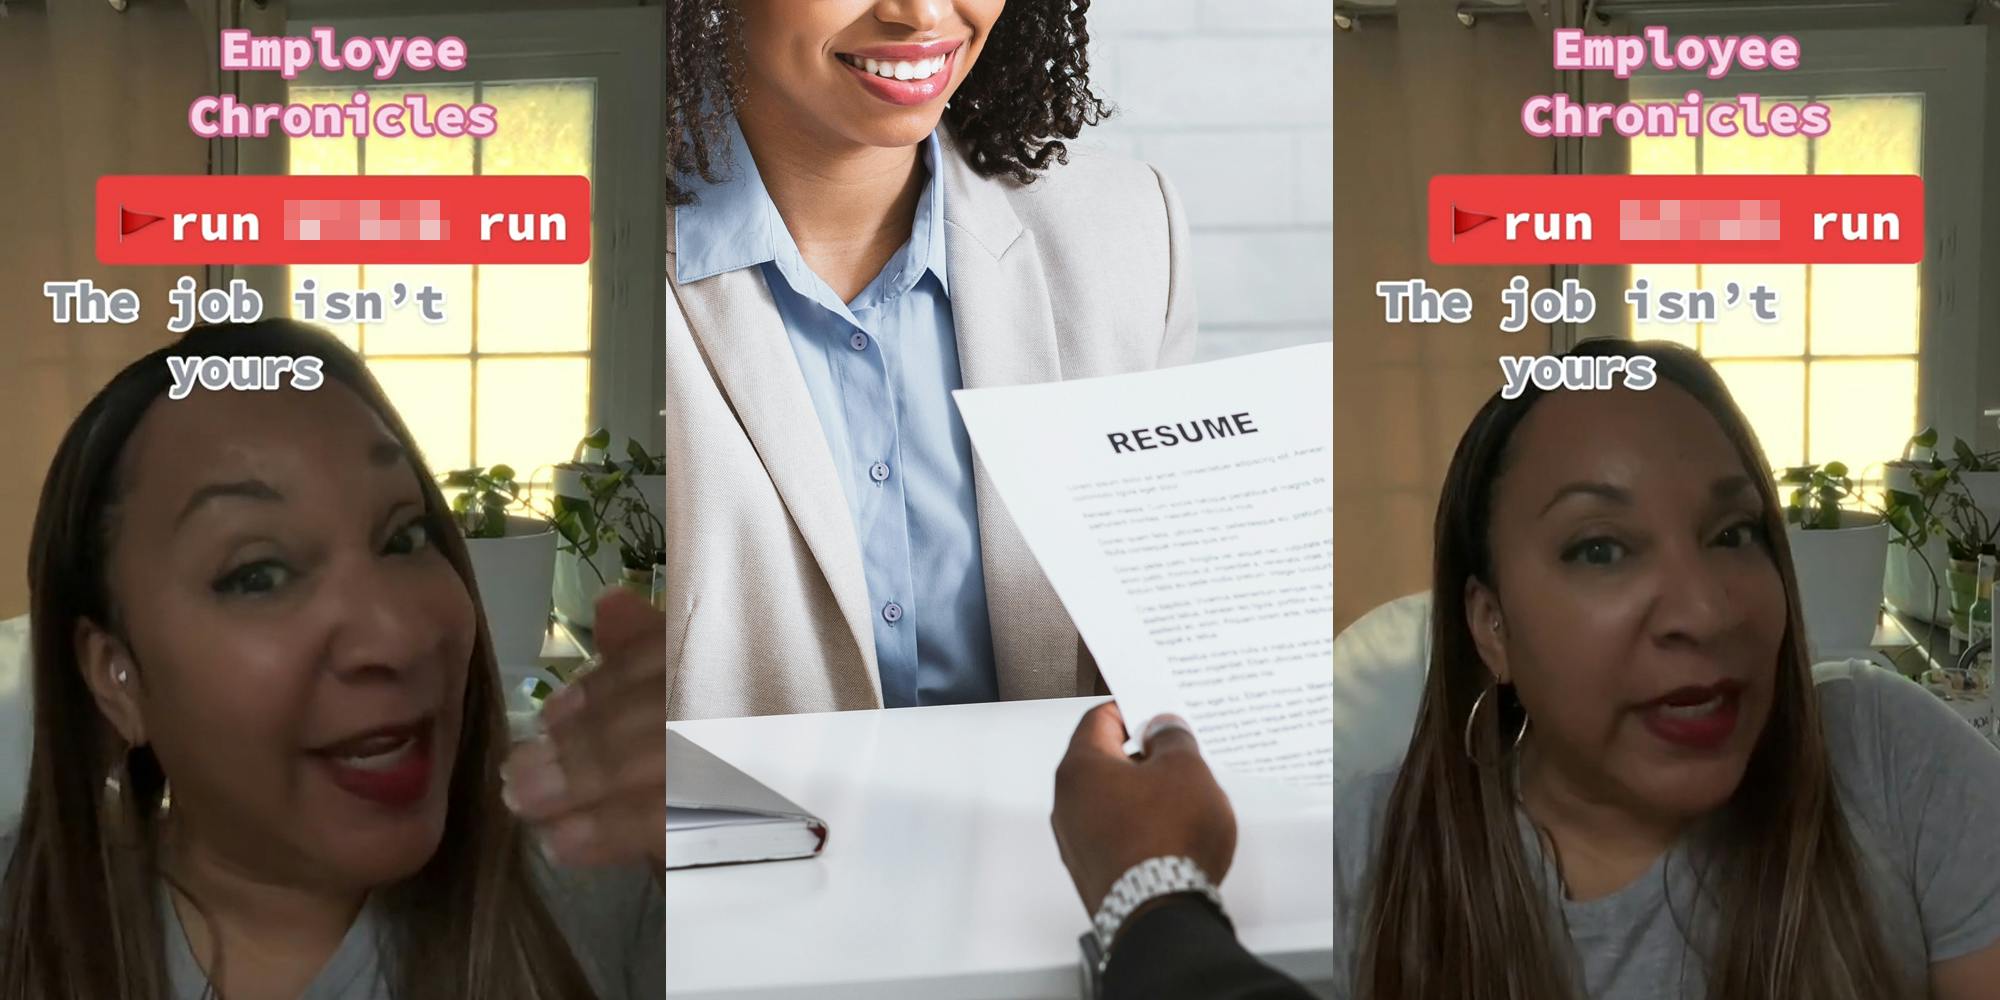 woman speaking with caption "Employee Chronicles run blank run The job isn't yours" (l) woman at job interview as manager holds and reads resume (c) woman speaking with caption "Employee Chronicles run blank run The job isn't yours" (r)